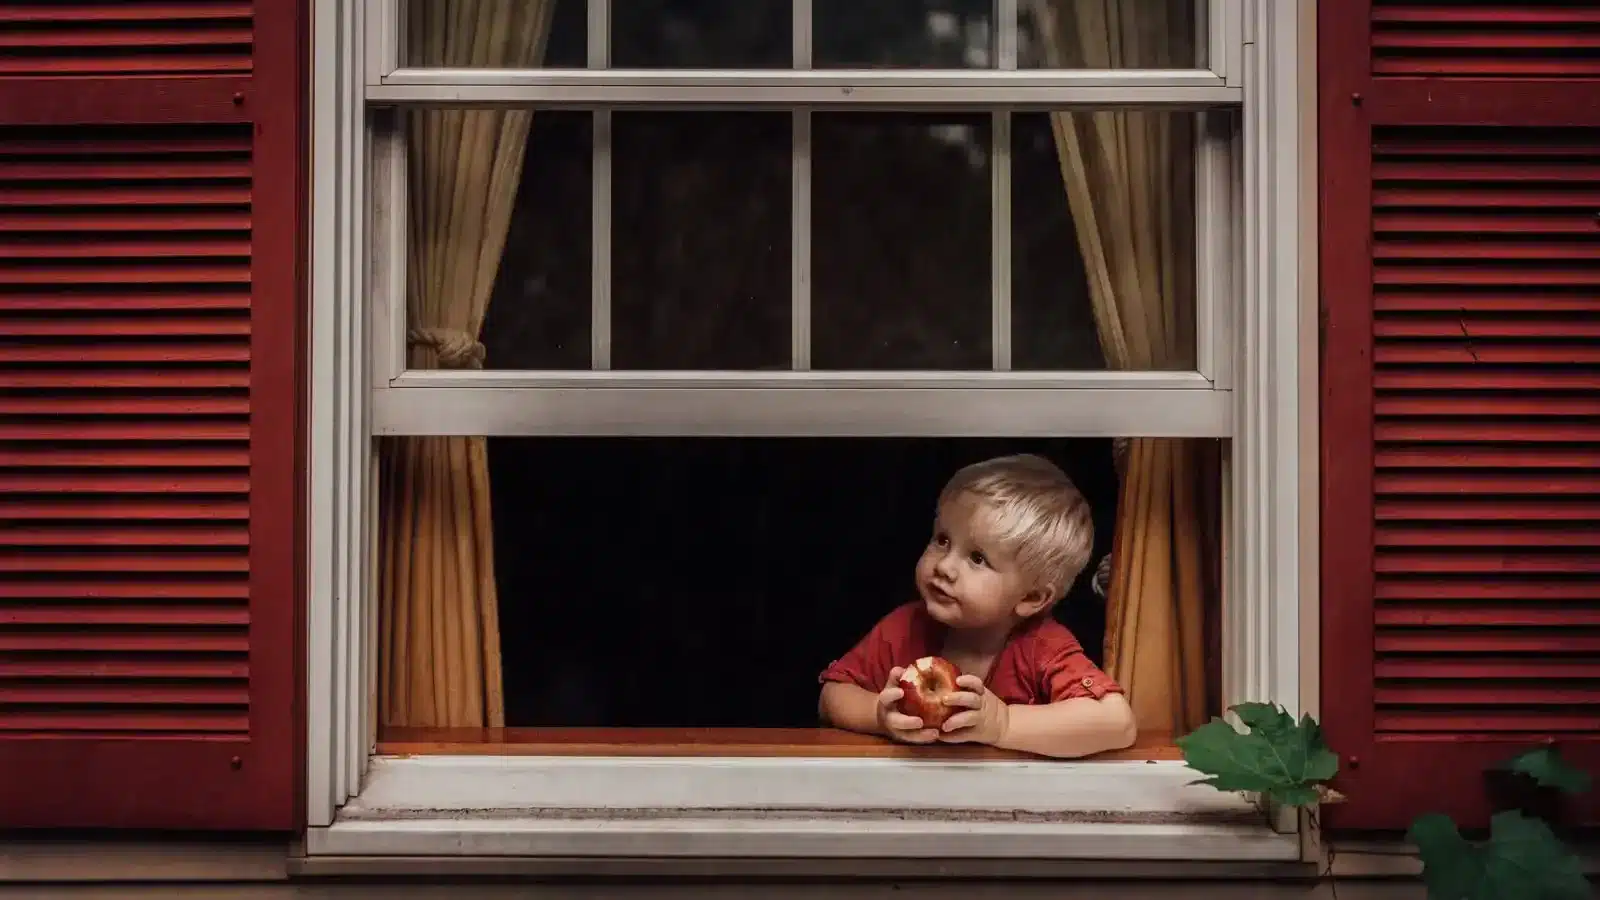 boy looking out window with red shutters by meg loeks edited 1 The most important steps to learn video production quickly